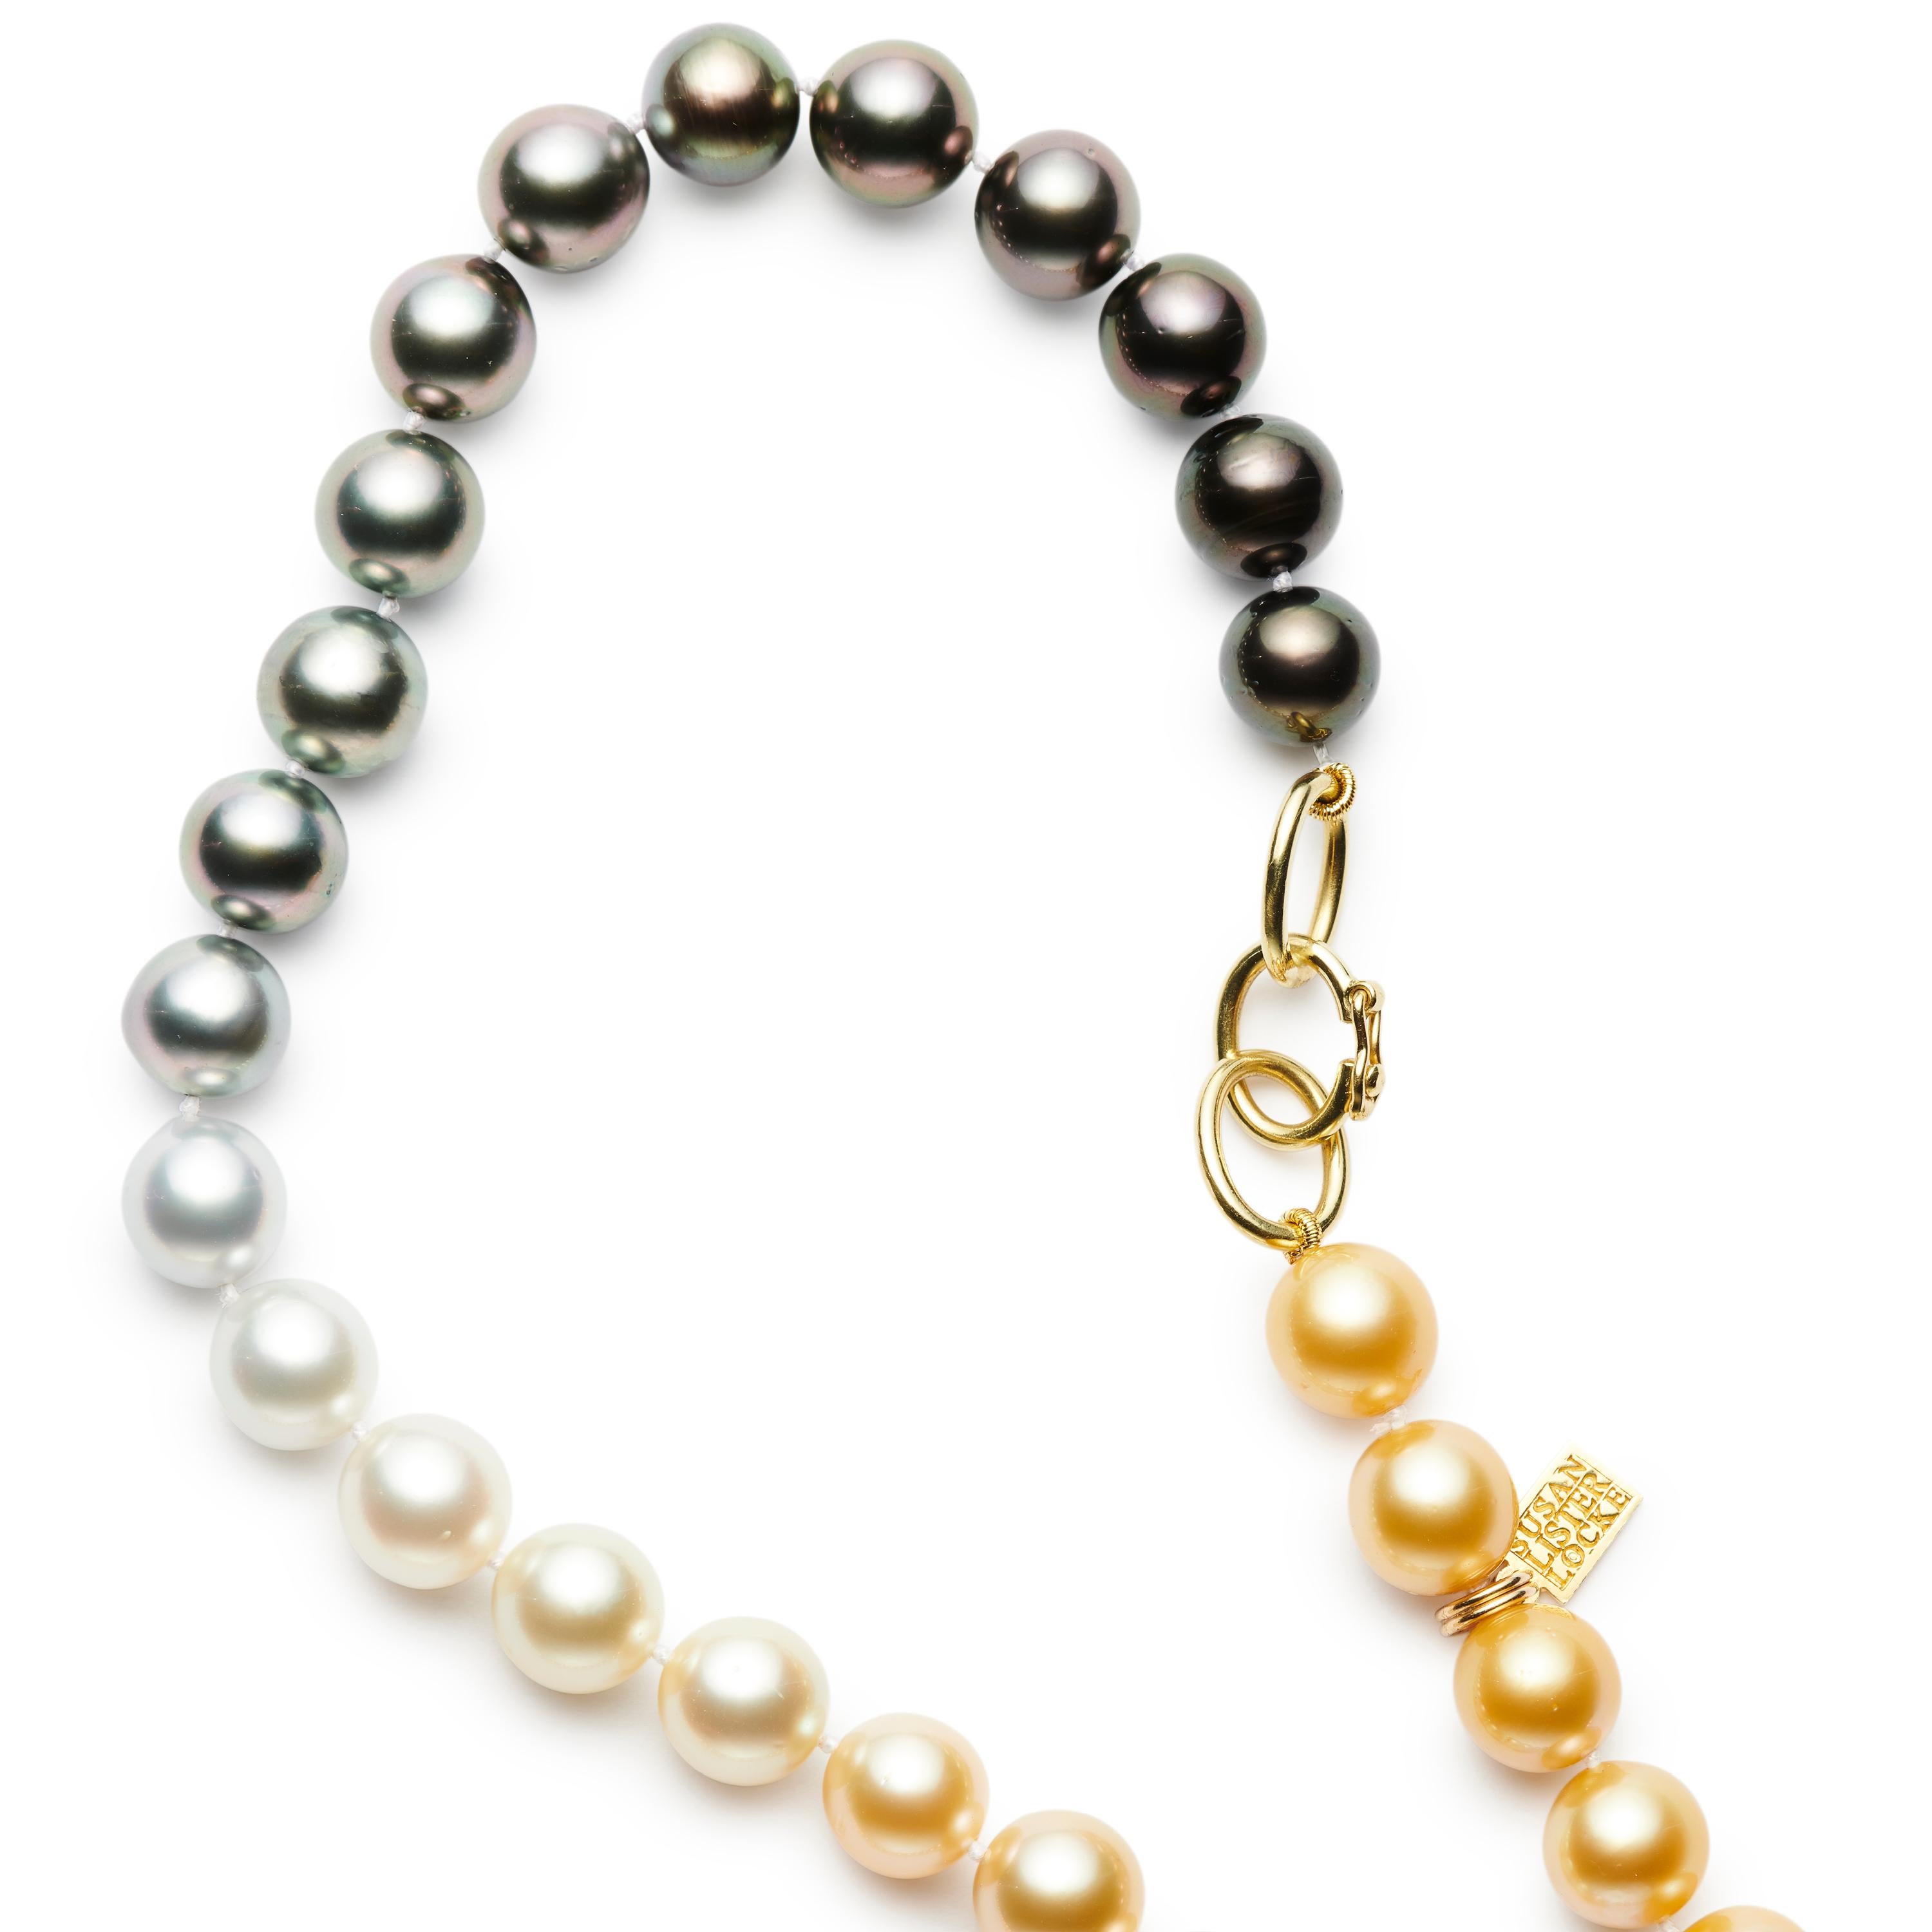 A stunning 48-inch, hand-knotted strand of ombre opulence. An impeccable gradient of Black Tahitian, Natural Golden and White South Sea 10mm Pearls to wear doubled, layered or as an exceptionally elegant single strand. Susan's 18kt Yellow Gold